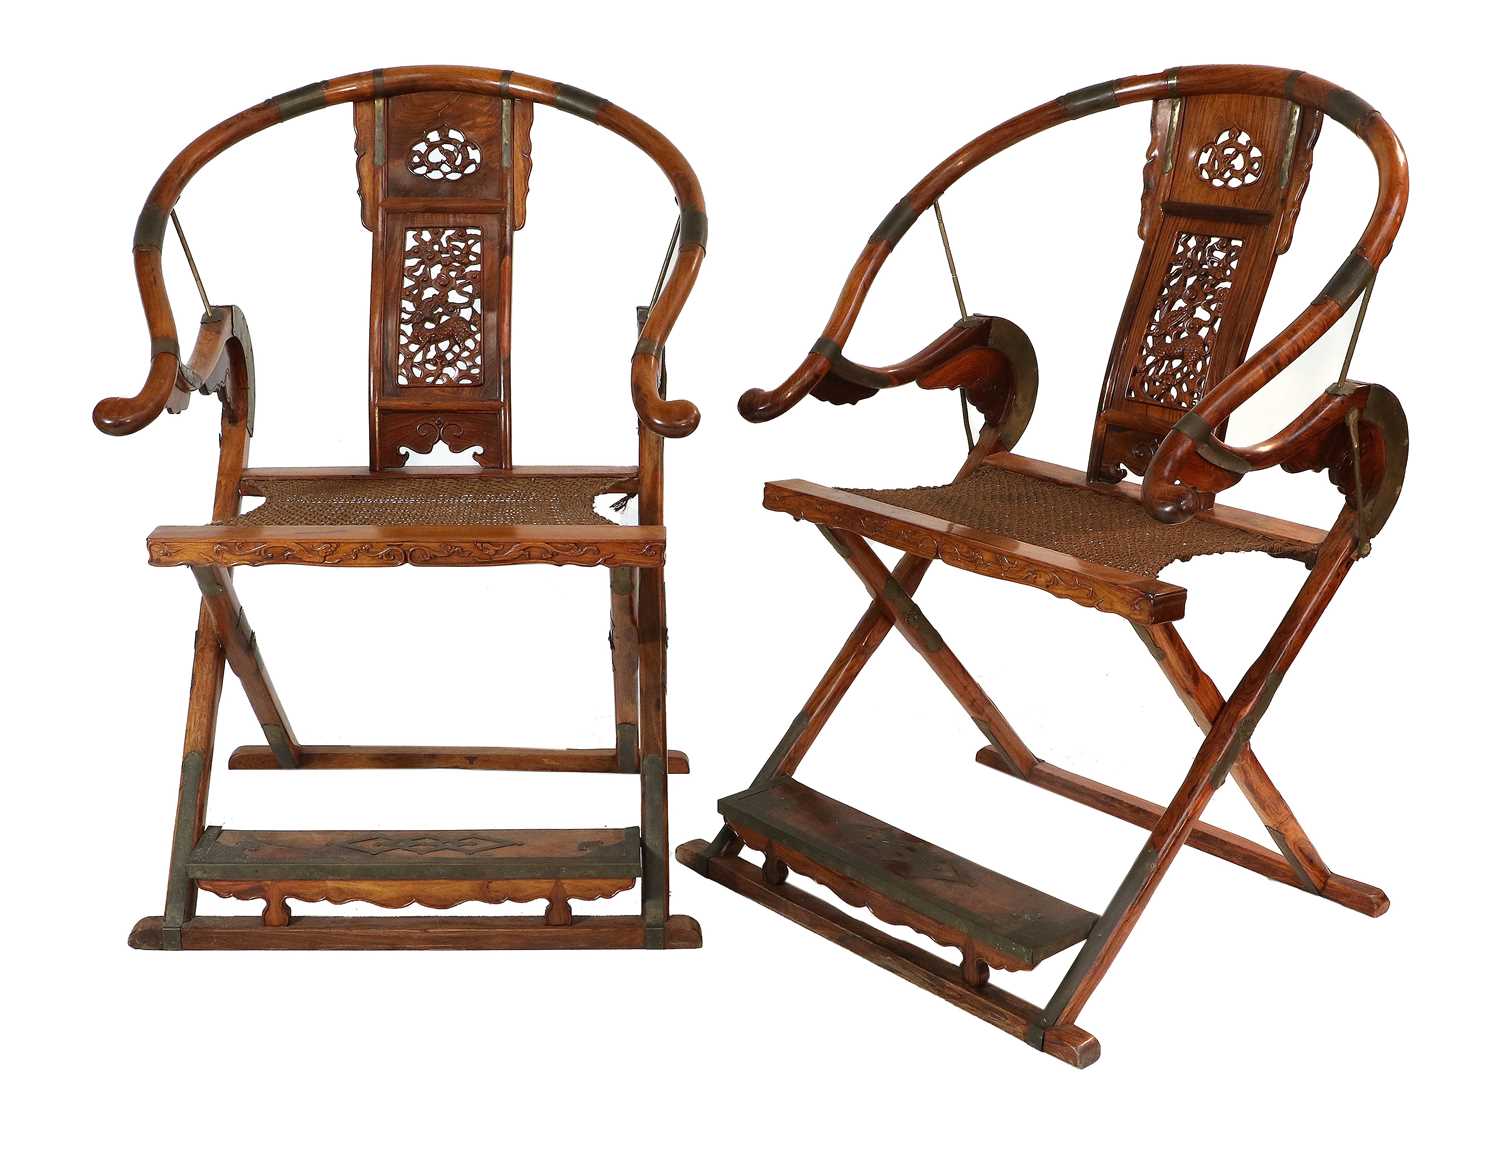 A Pair of 20th Century Chinese Hardwood Horseshoe-Back Folding Chairs, each with metal bands and